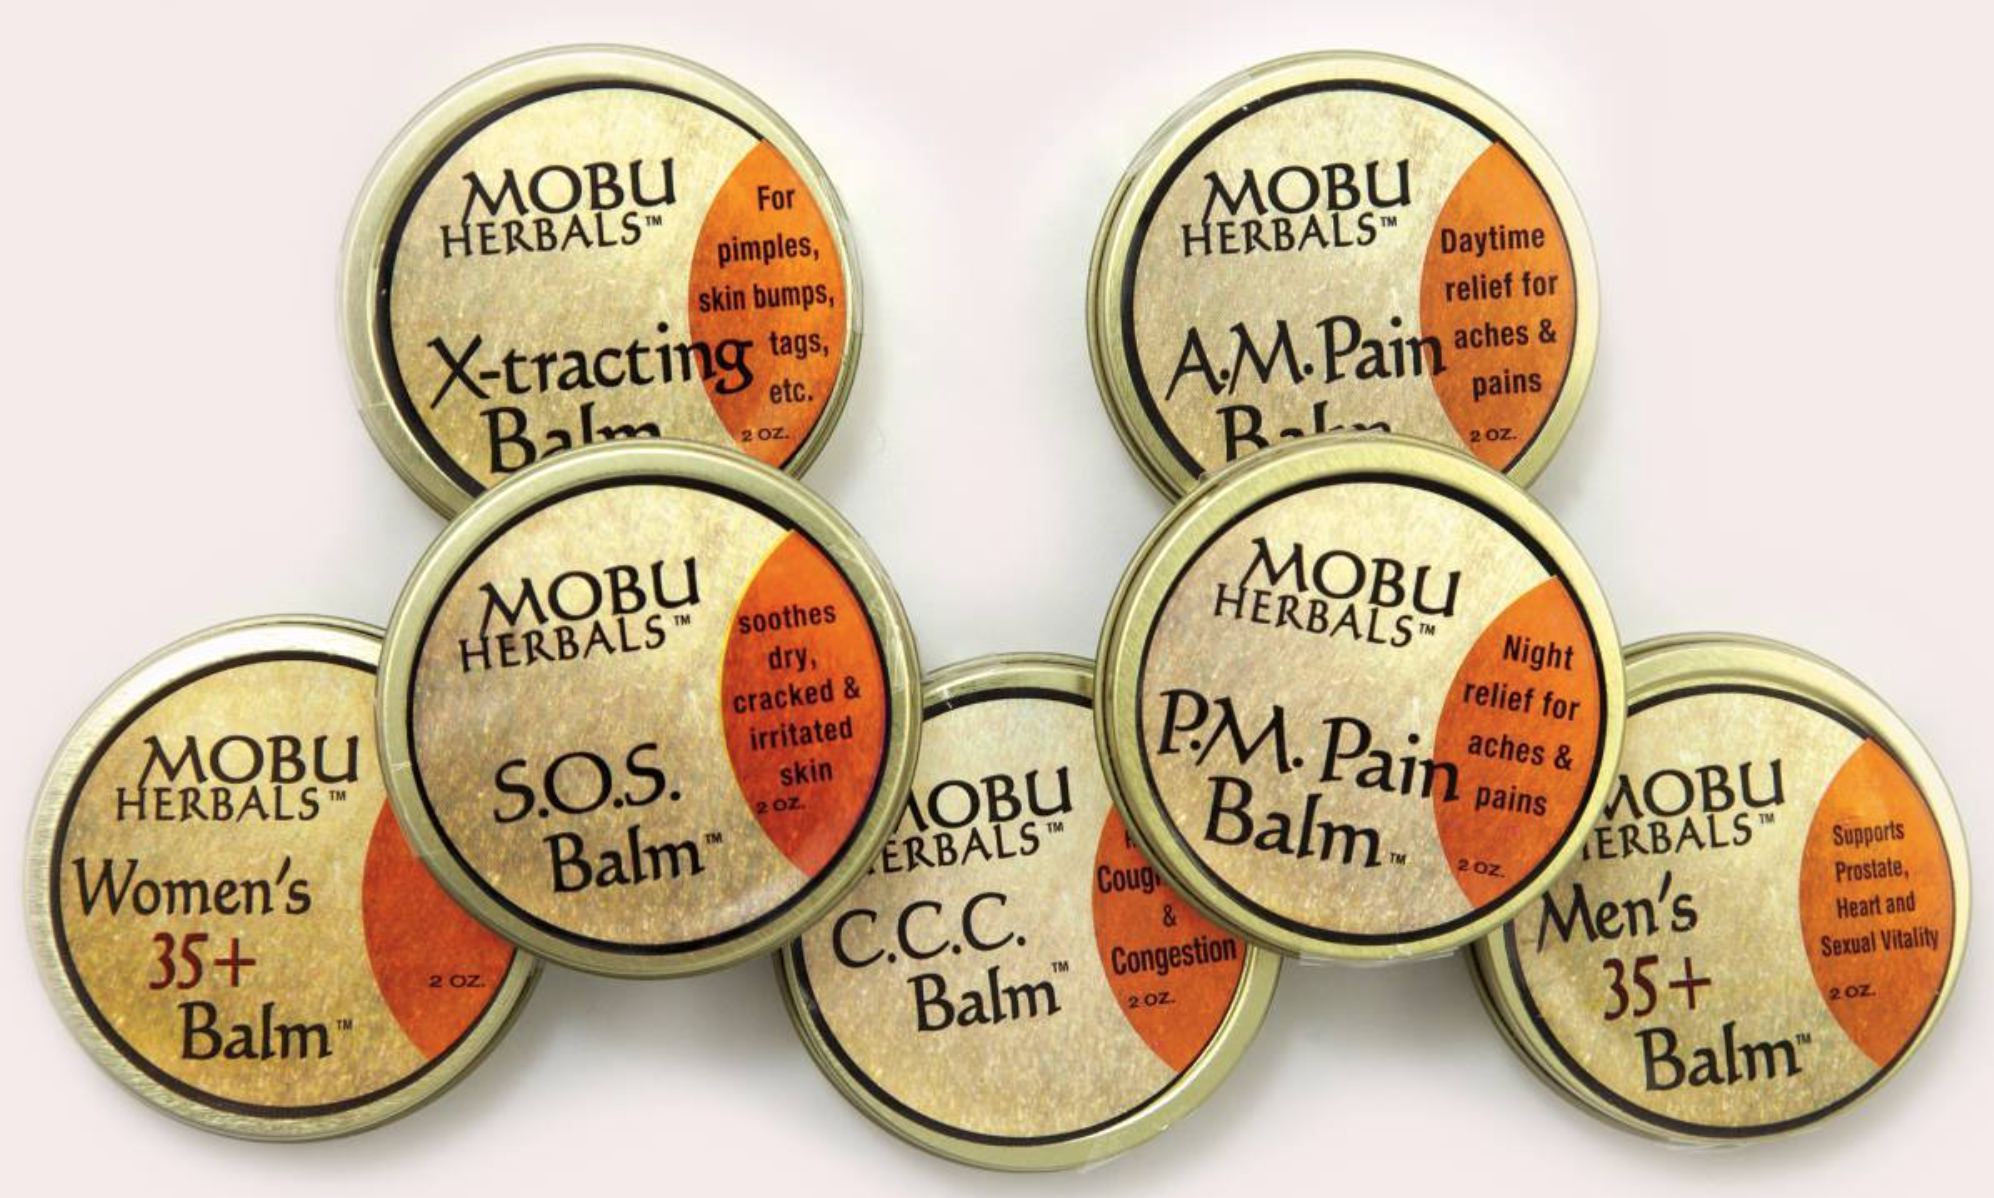 Mobu Herbals now Dr. Cole's